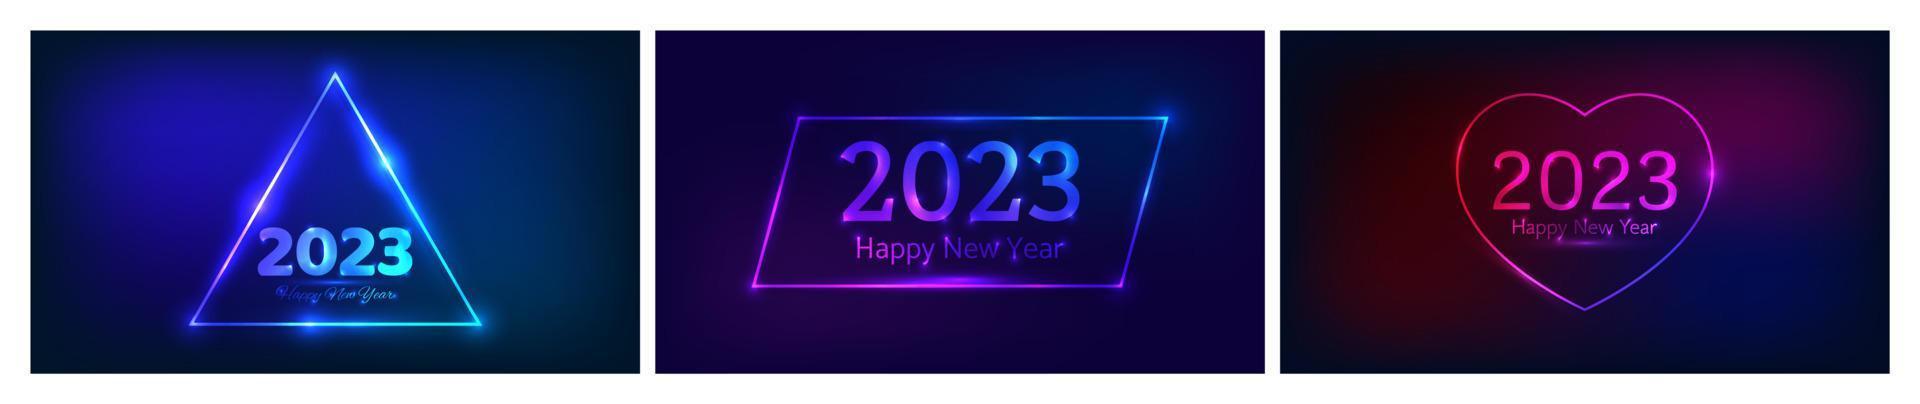 2023 Happy New Year neon background. Set of three neon backdrops with different geometric frames with shining effects and inscription Happy New Year. Dark background for Christmas vector